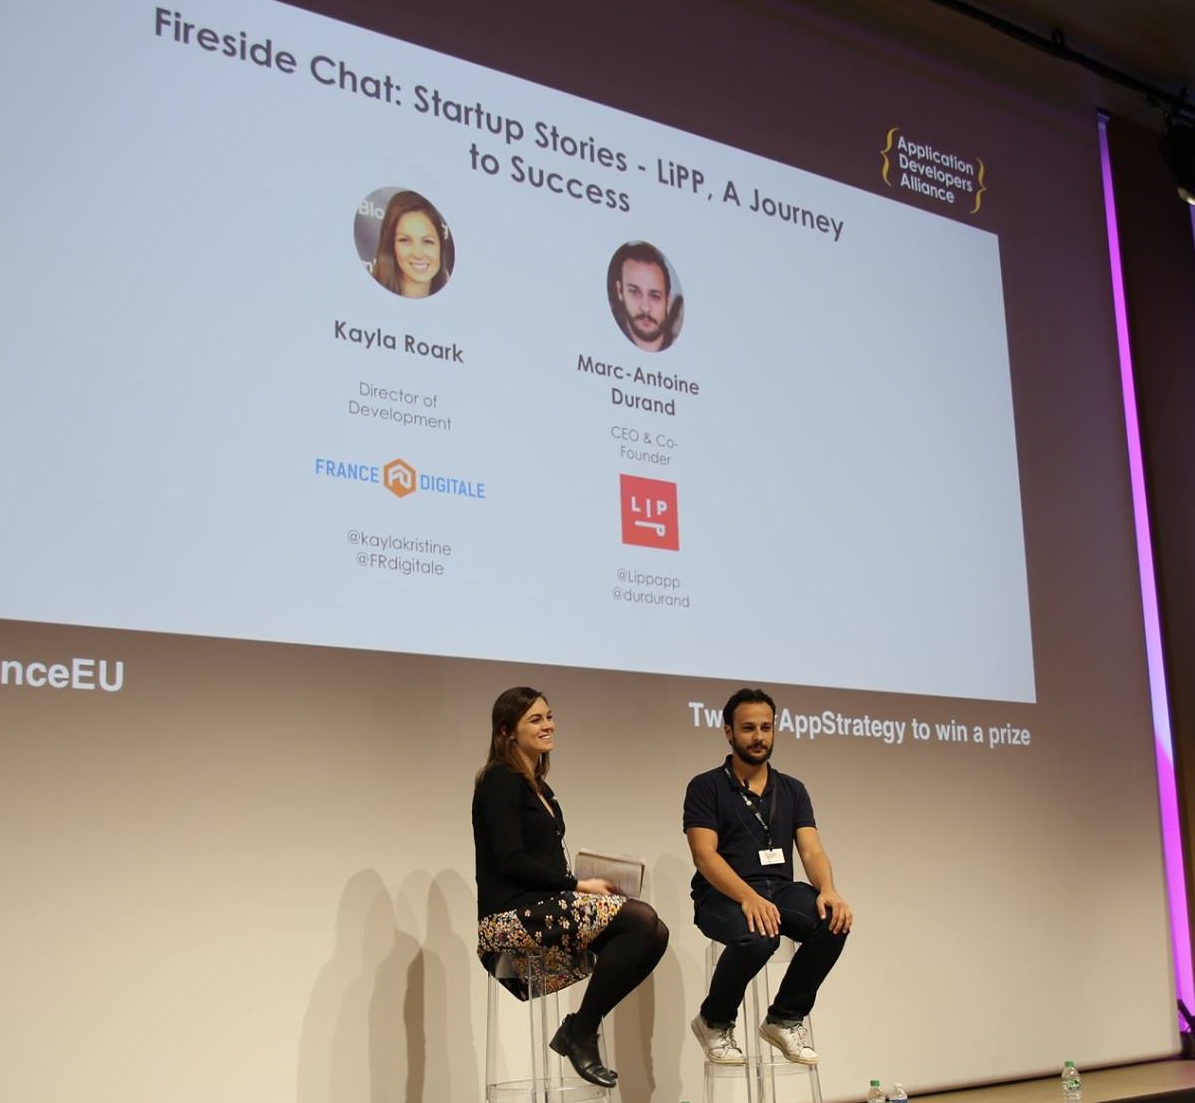 Kayla Roark, Director of Development, France Digitale moderated a fireside chat with&nbsp;Marc-Antoine Durand, CEO &amp; Co-Founder, LiPP.